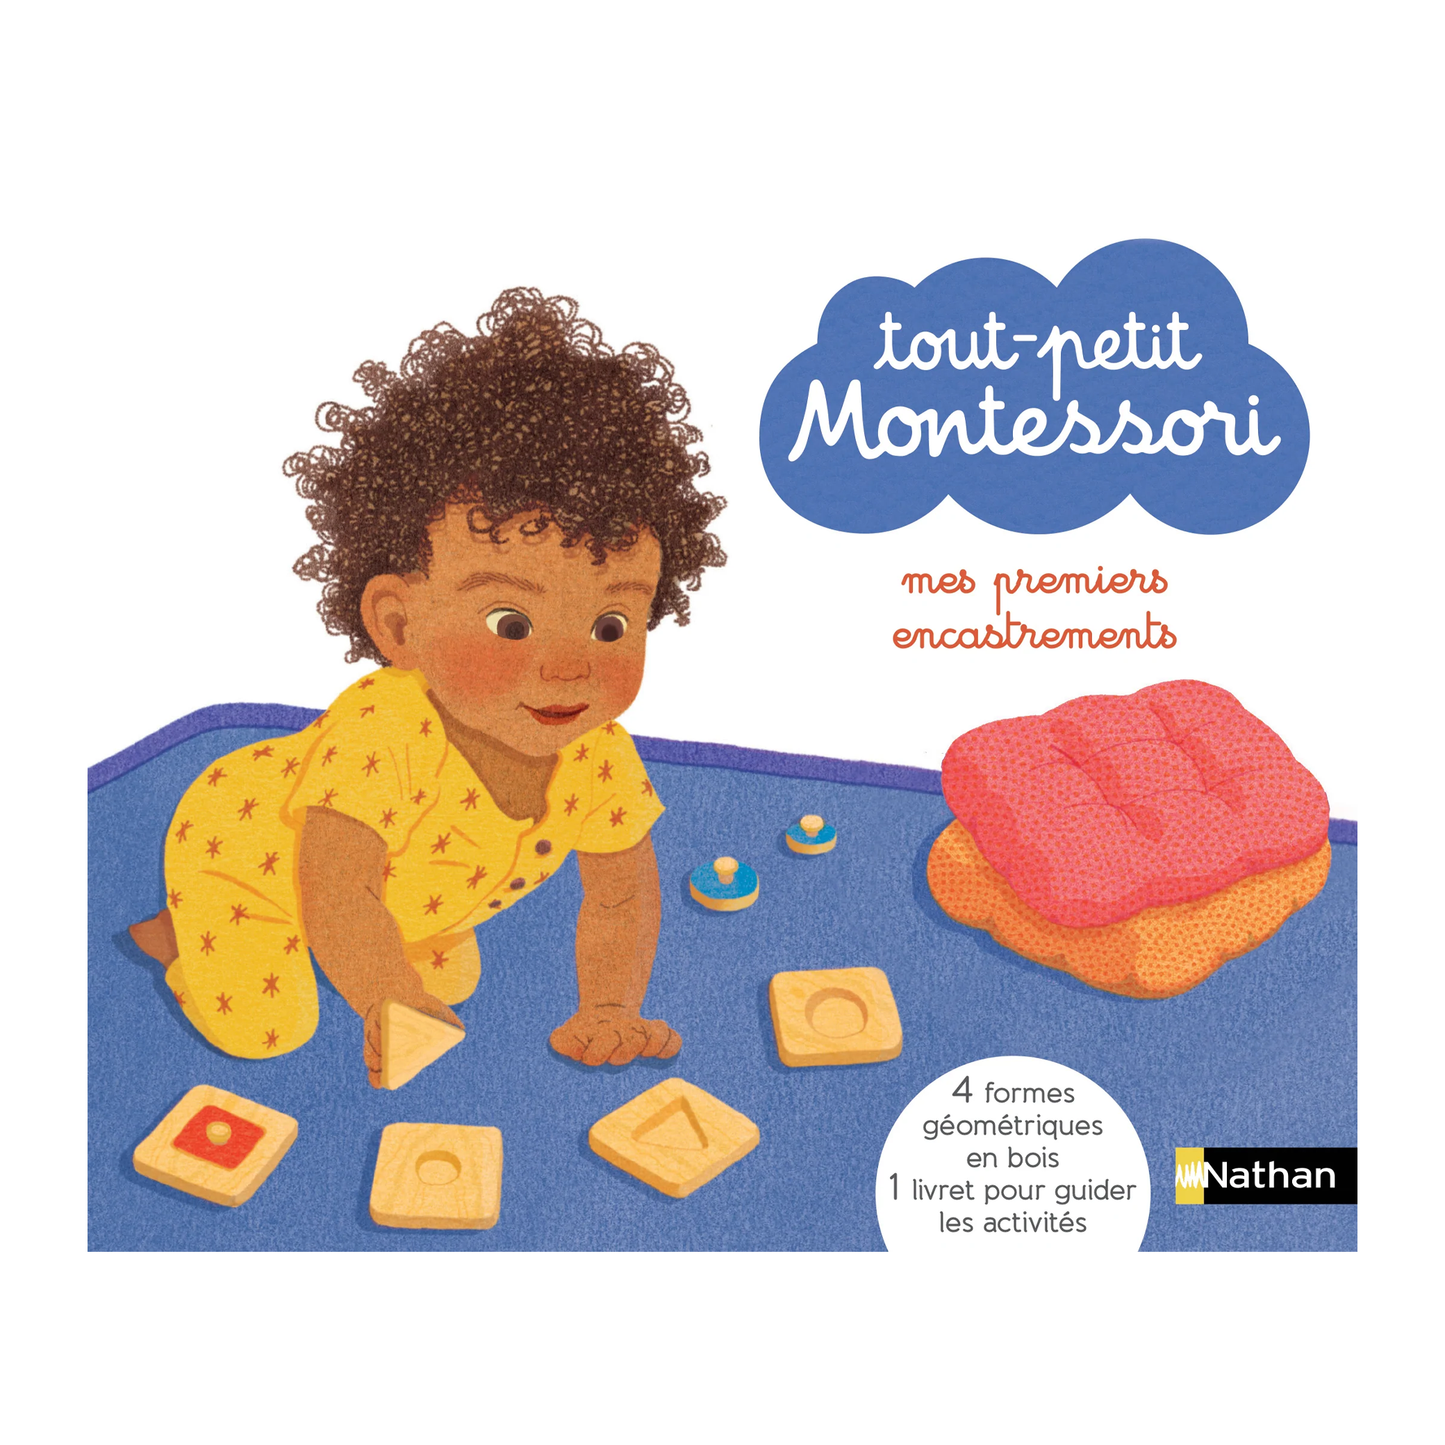 Toddler Montessori - my first embedments - Box -Nathan